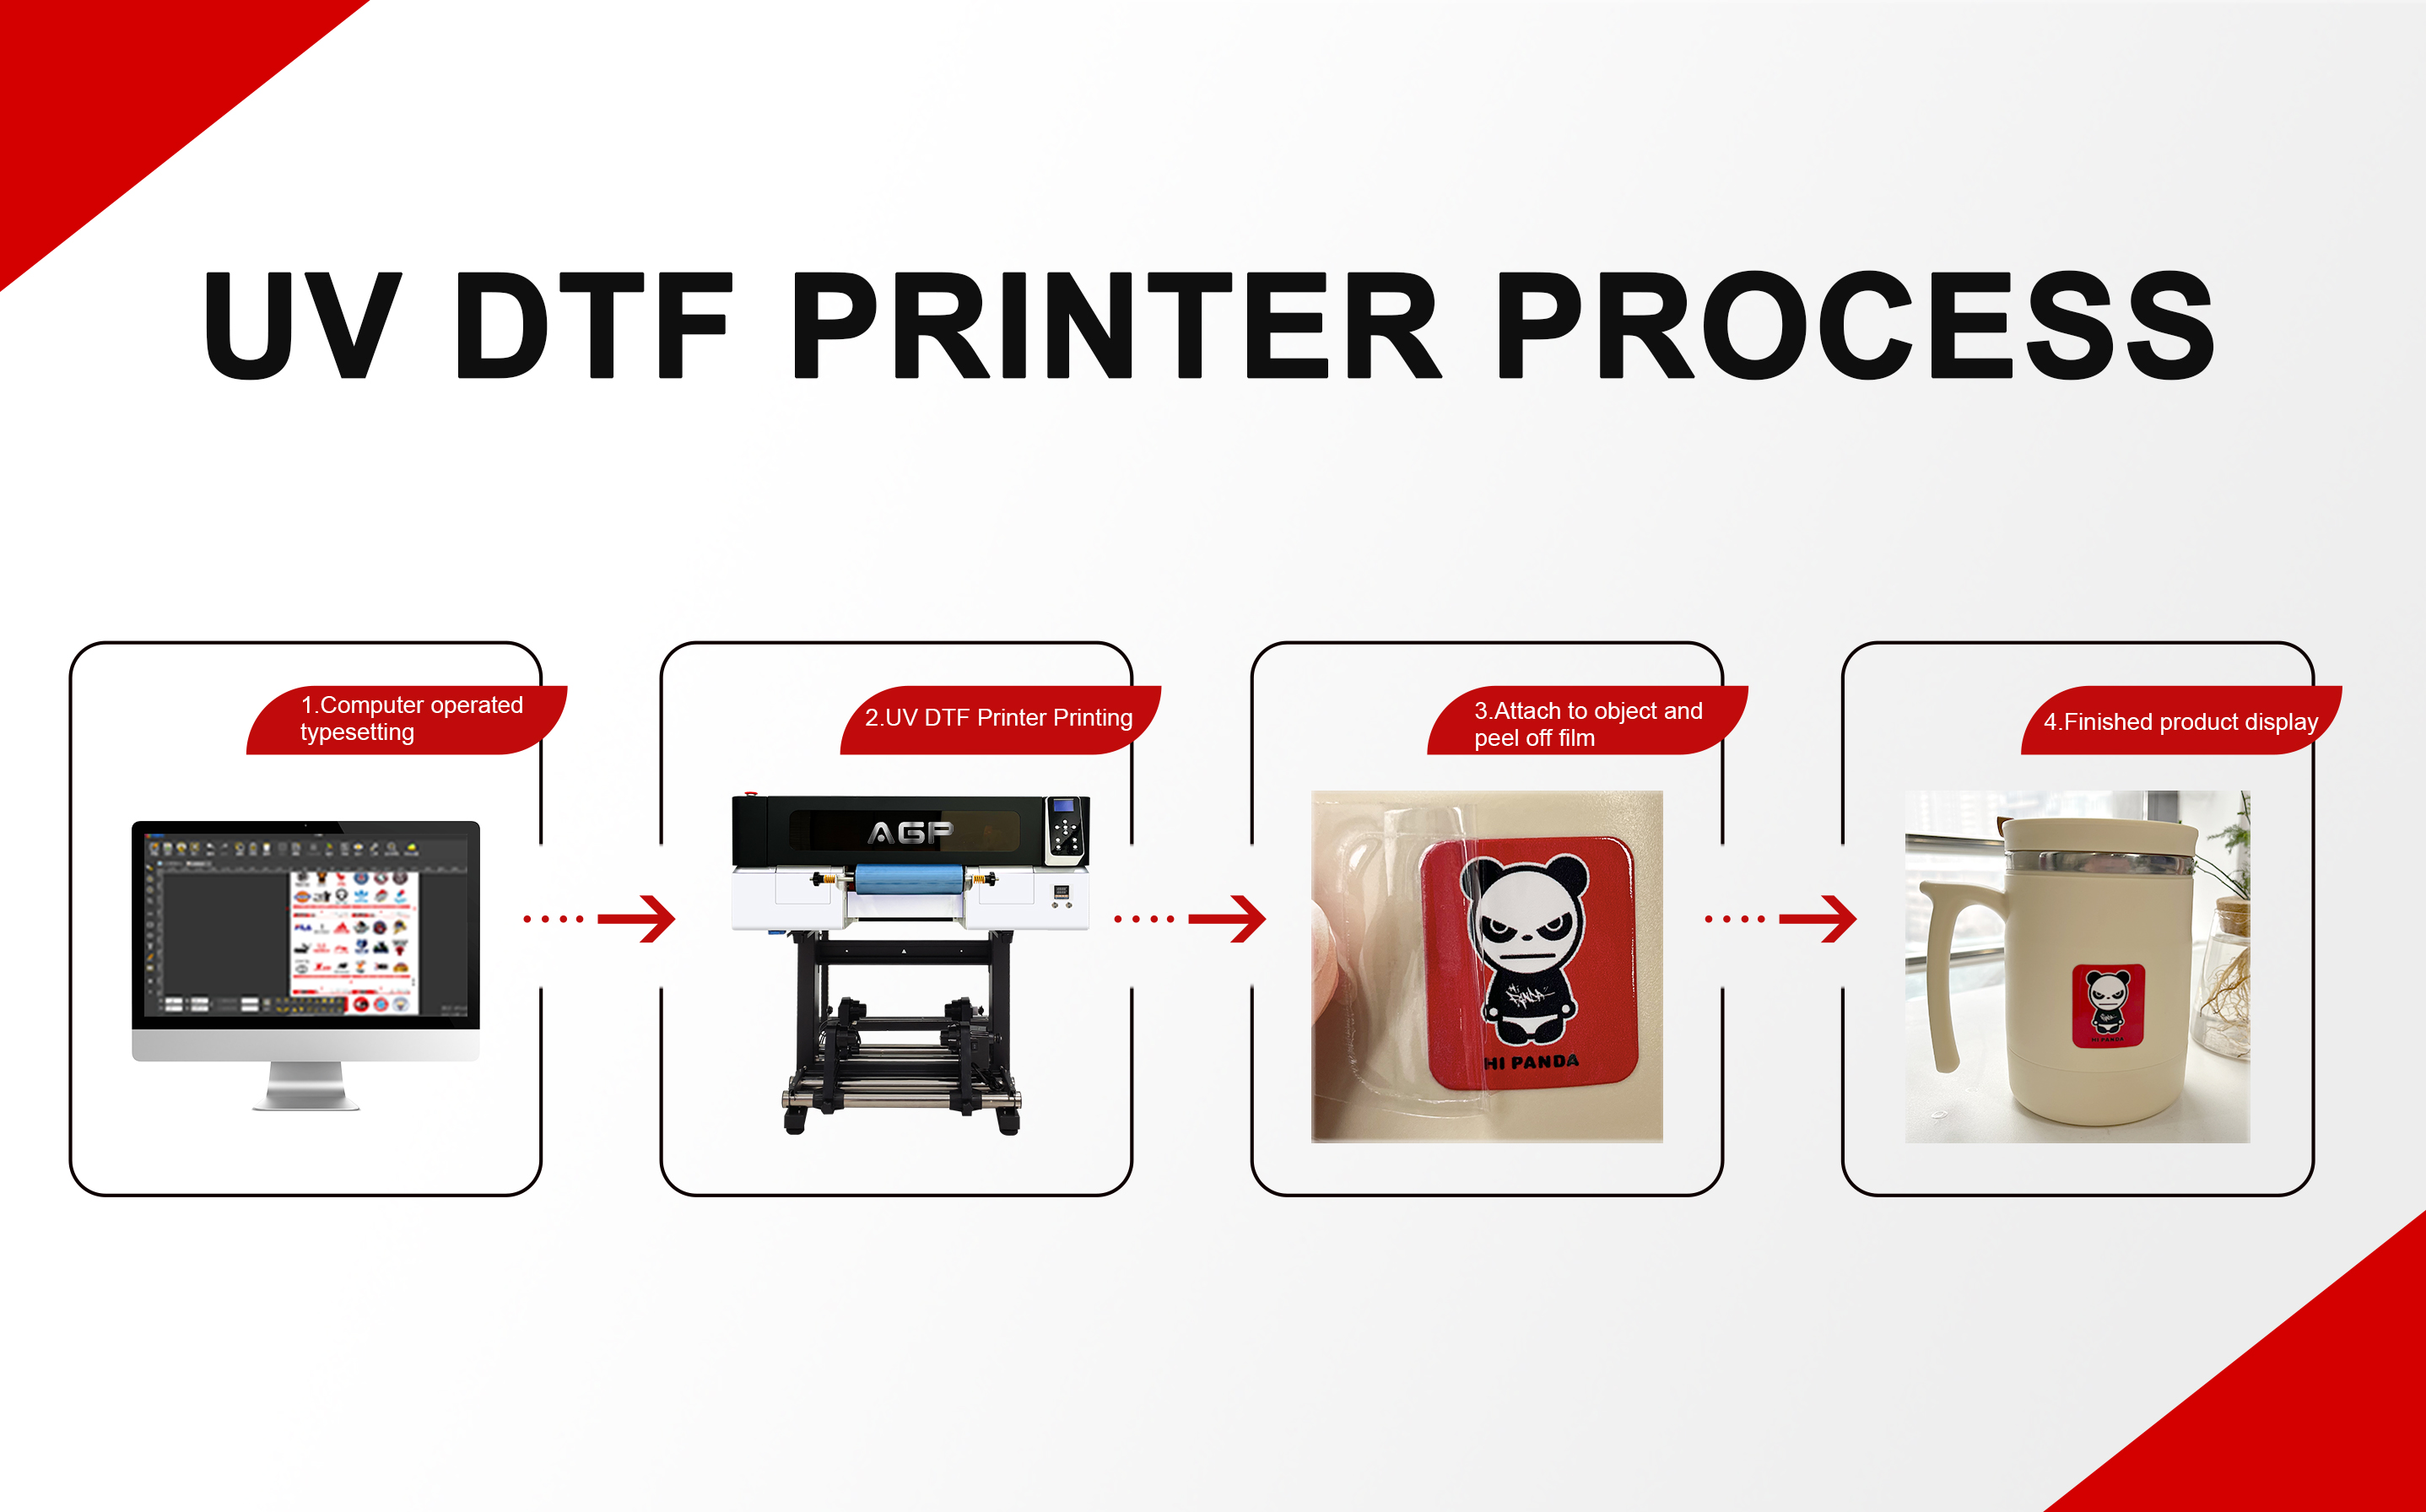 How Does A UV DTF Printer Work?